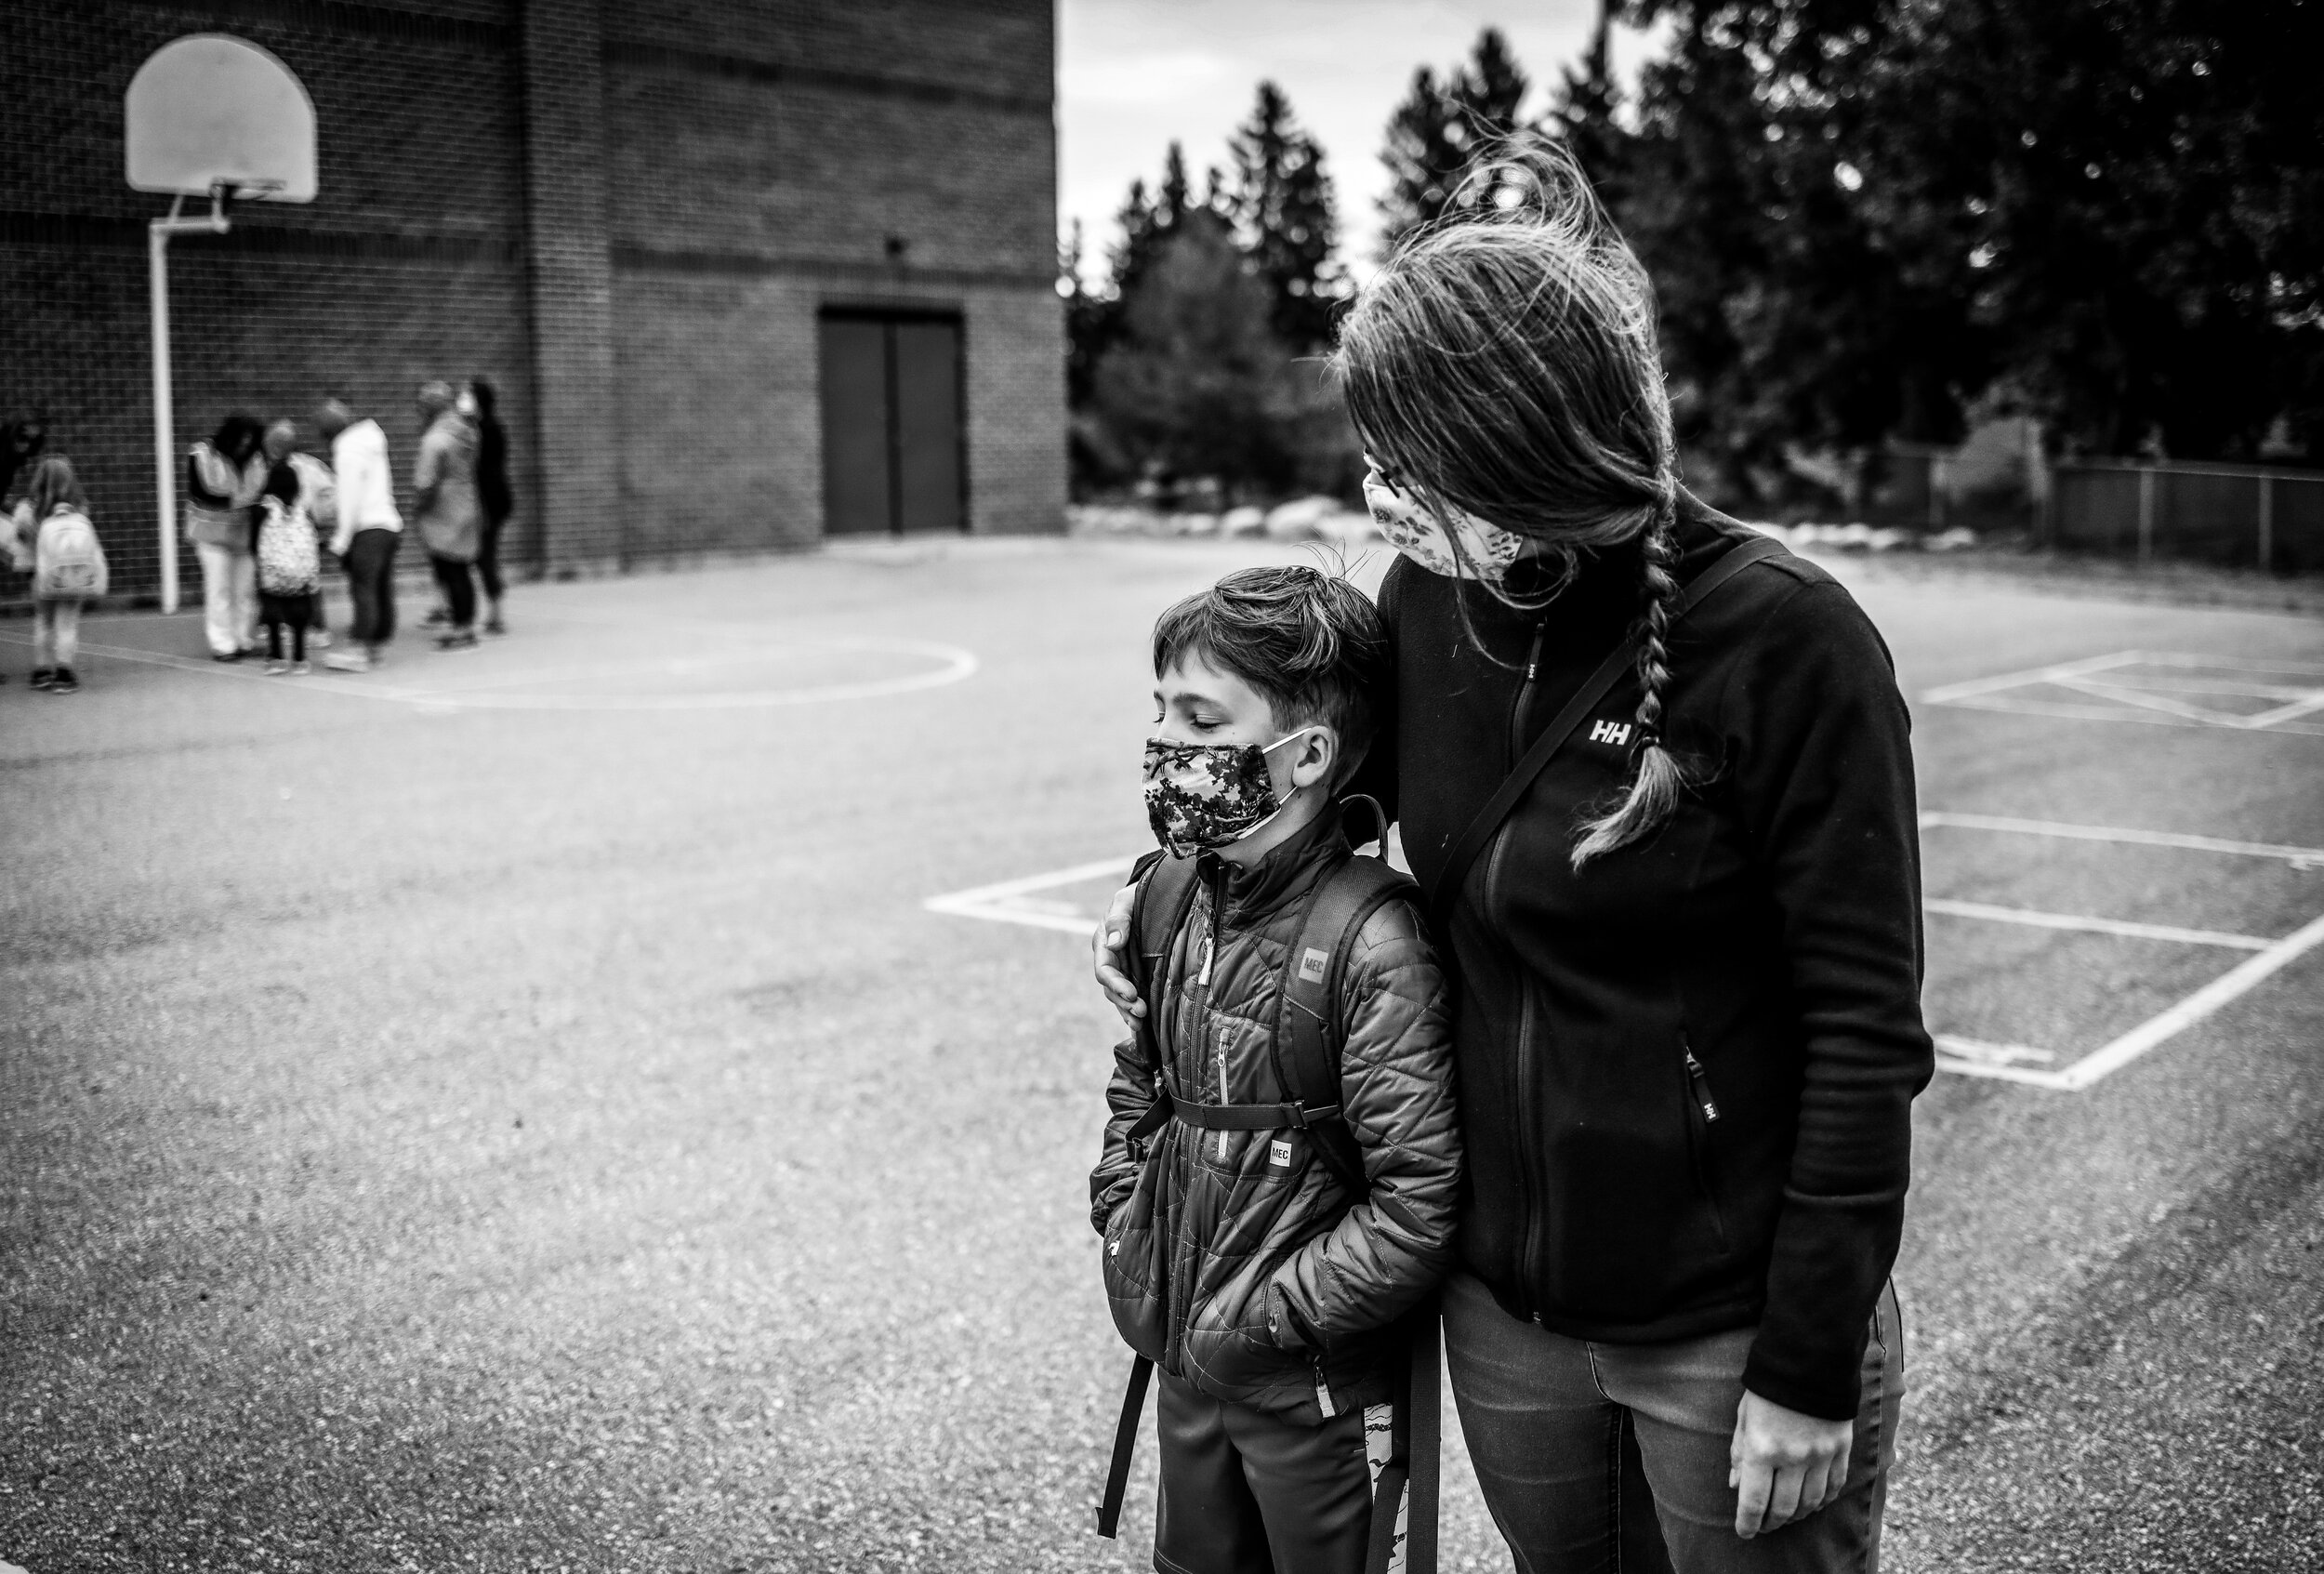  Karilynn Simpson waits with her son William on his first day back to school in Calgary, Alberta during the COVID-19 pandemic. 